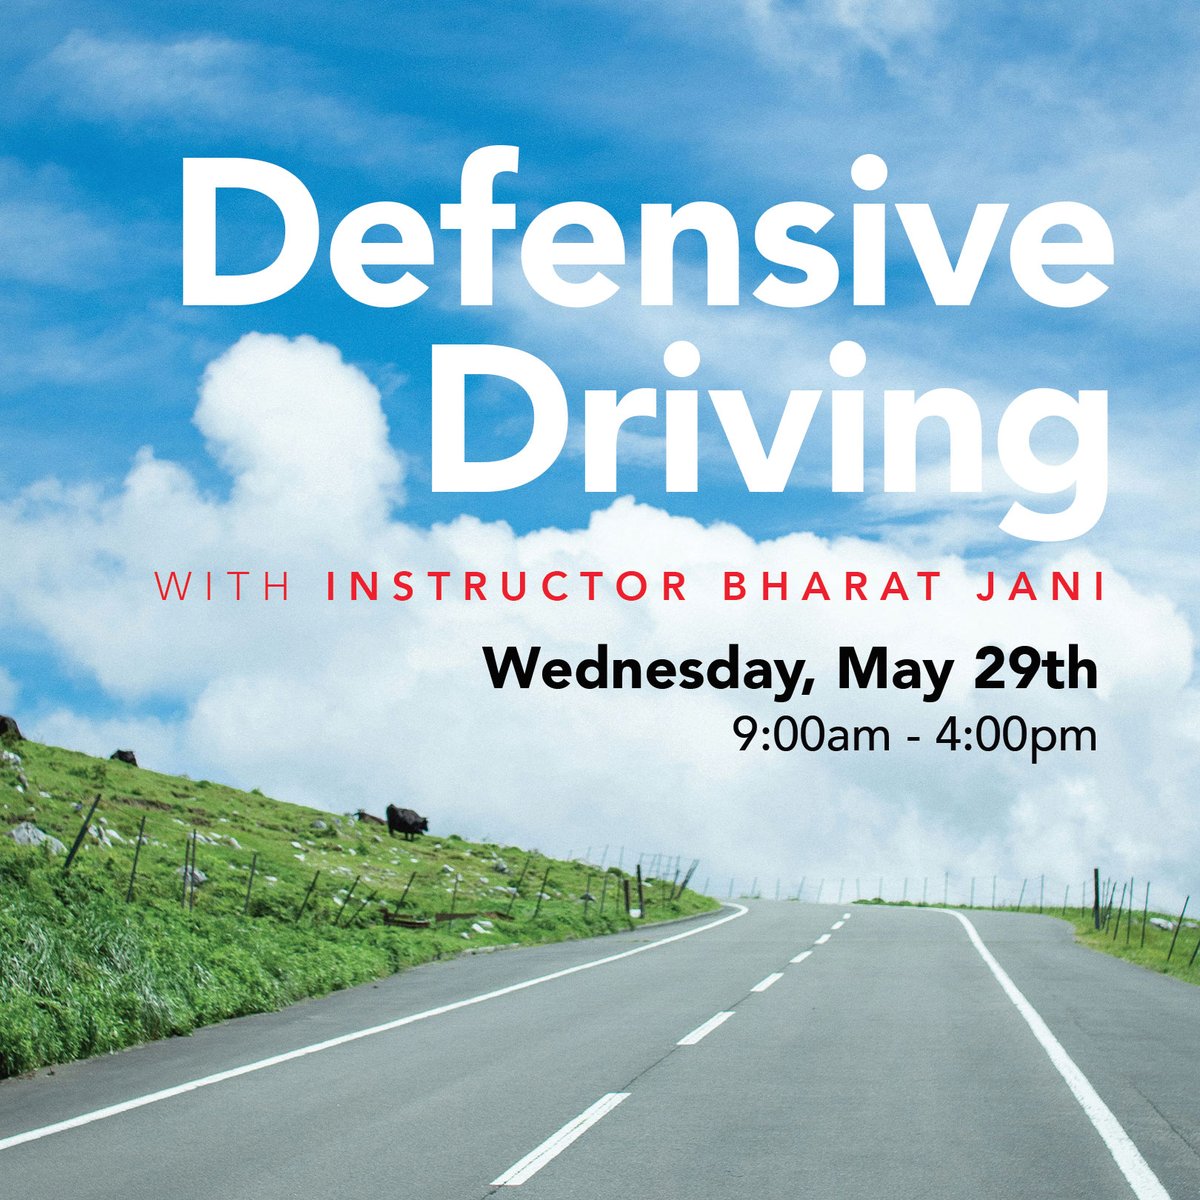 Instructor: Bharat Jani. A $45 materials fee is due by May 28. Cash or checks made payable to Bharat Jani. Feel free to bring lunch. Limited space.

Visit our website to register.

#defensivedriving #drivingcourse #insurance #hhﬂ  #librariesrock